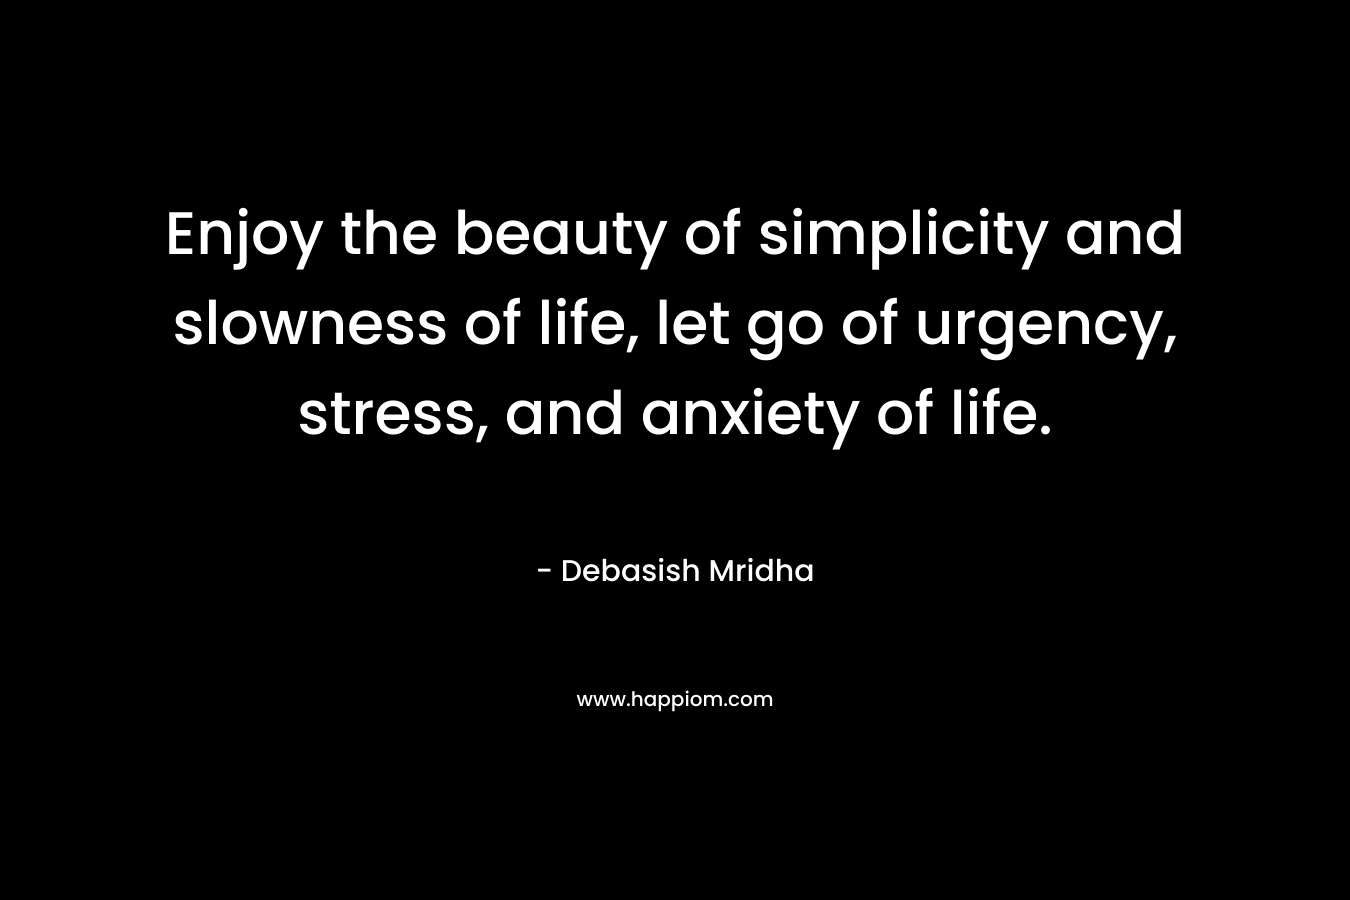 Enjoy the beauty of simplicity and slowness of life, let go of urgency, stress, and anxiety of life.